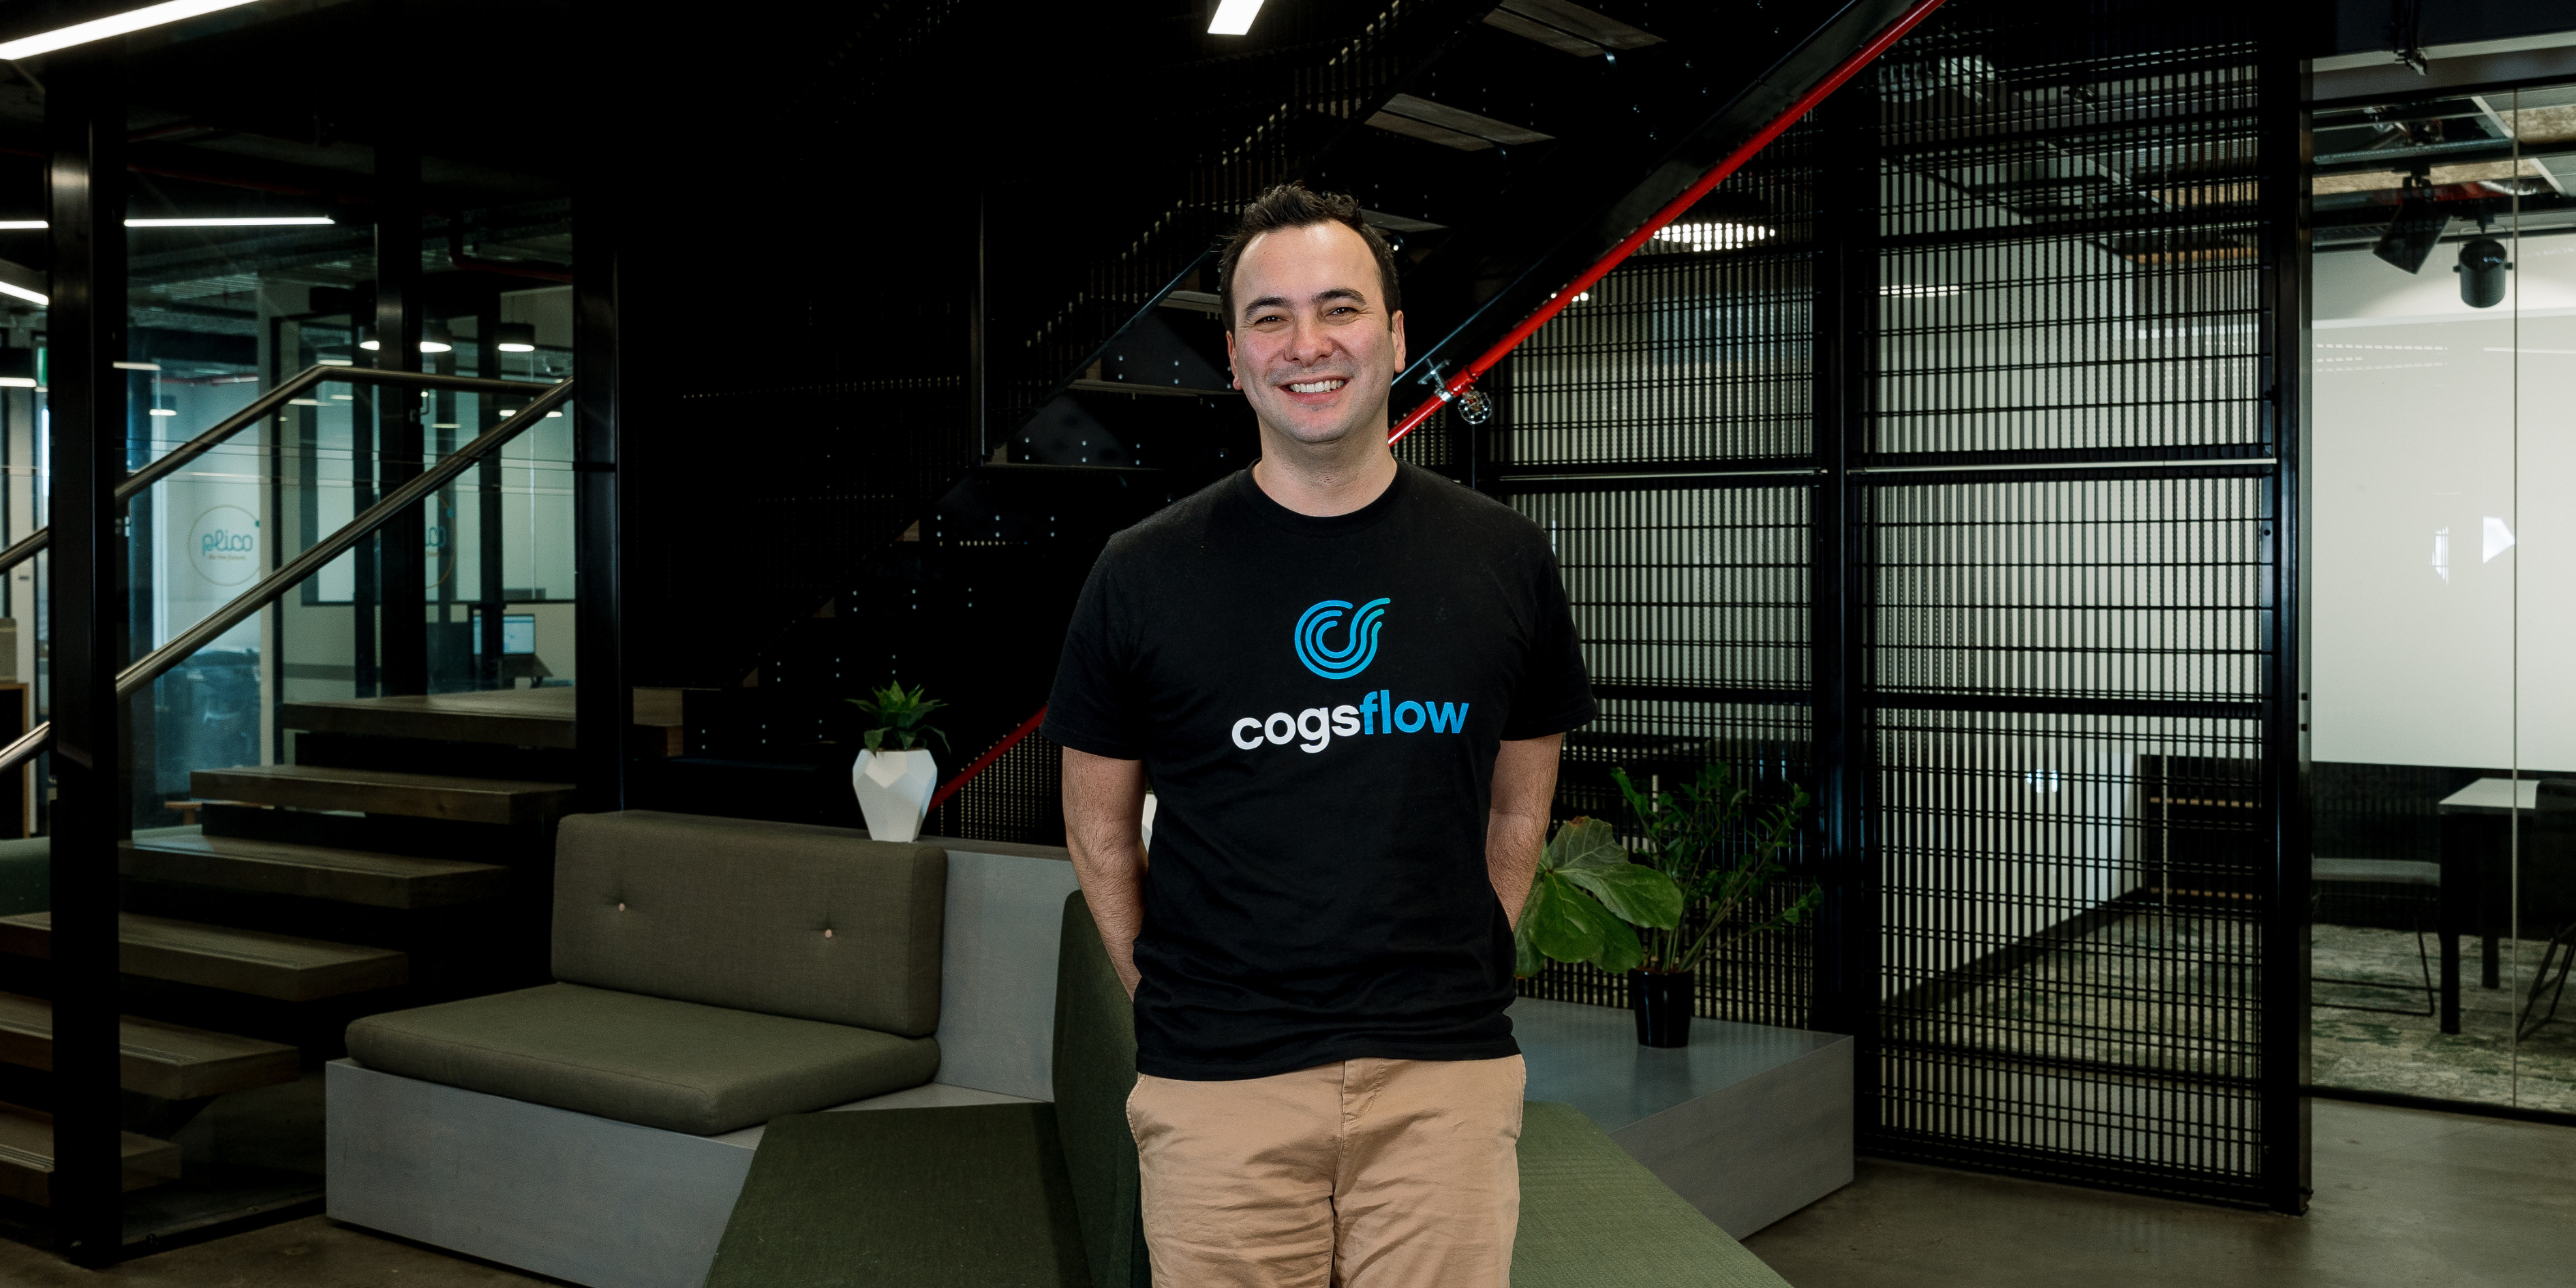 Meet David Carbines, Founder of Cogsflow and part of Phase One of the 2023 Plus Eight Accelerator